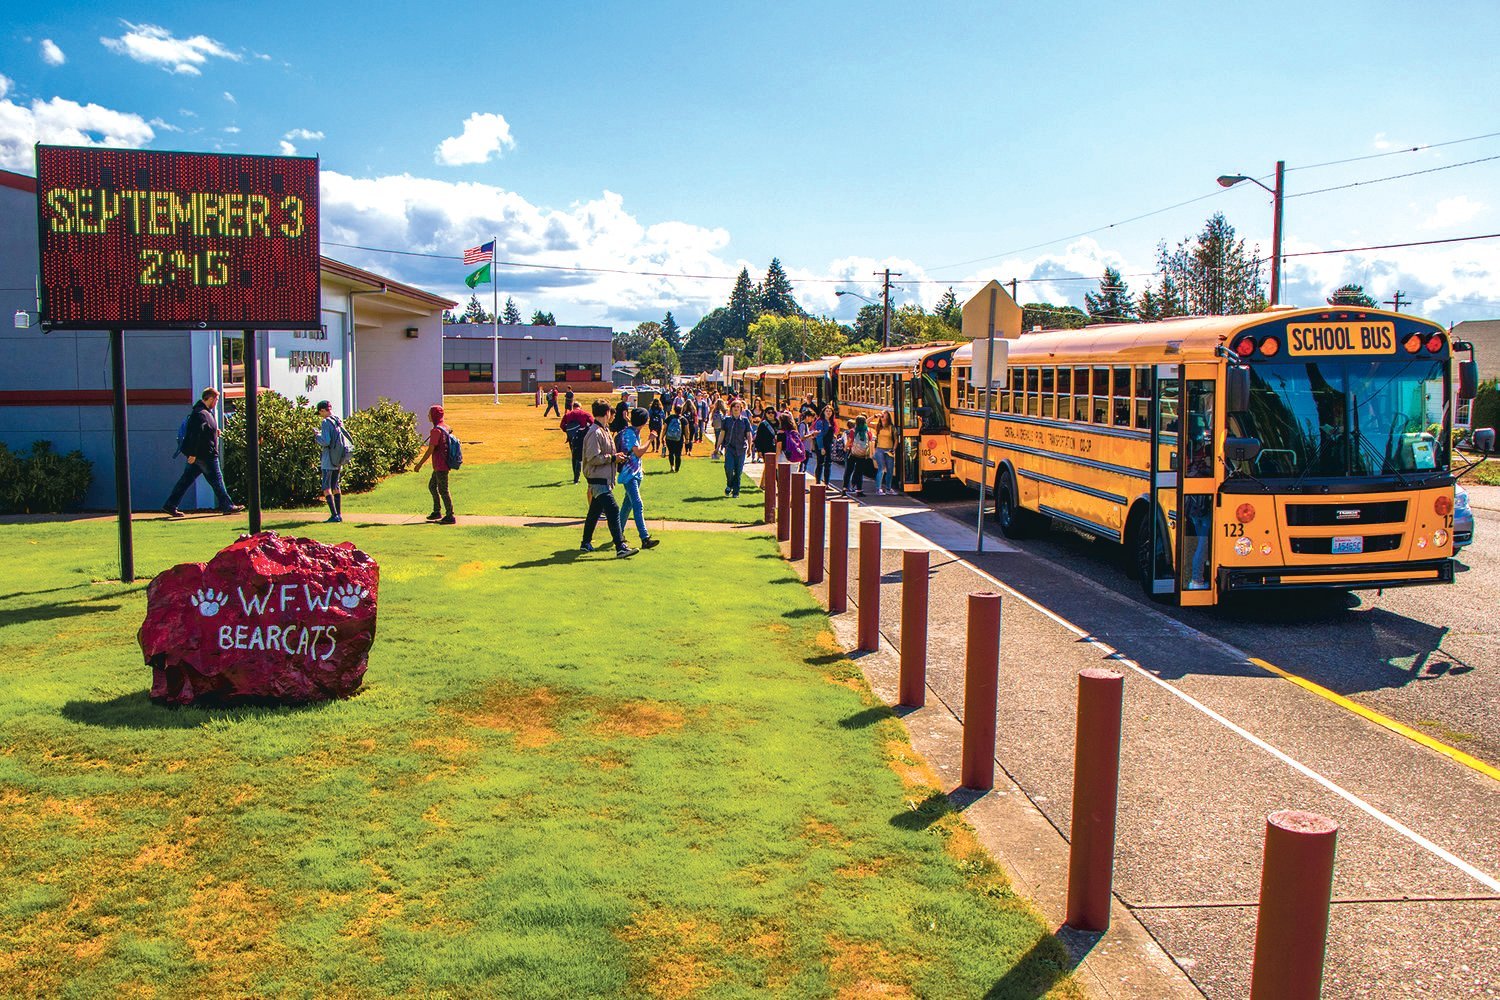 Students flood into buses at W.F. West High School as school is let out Tuesday afternoon in Chehalis.